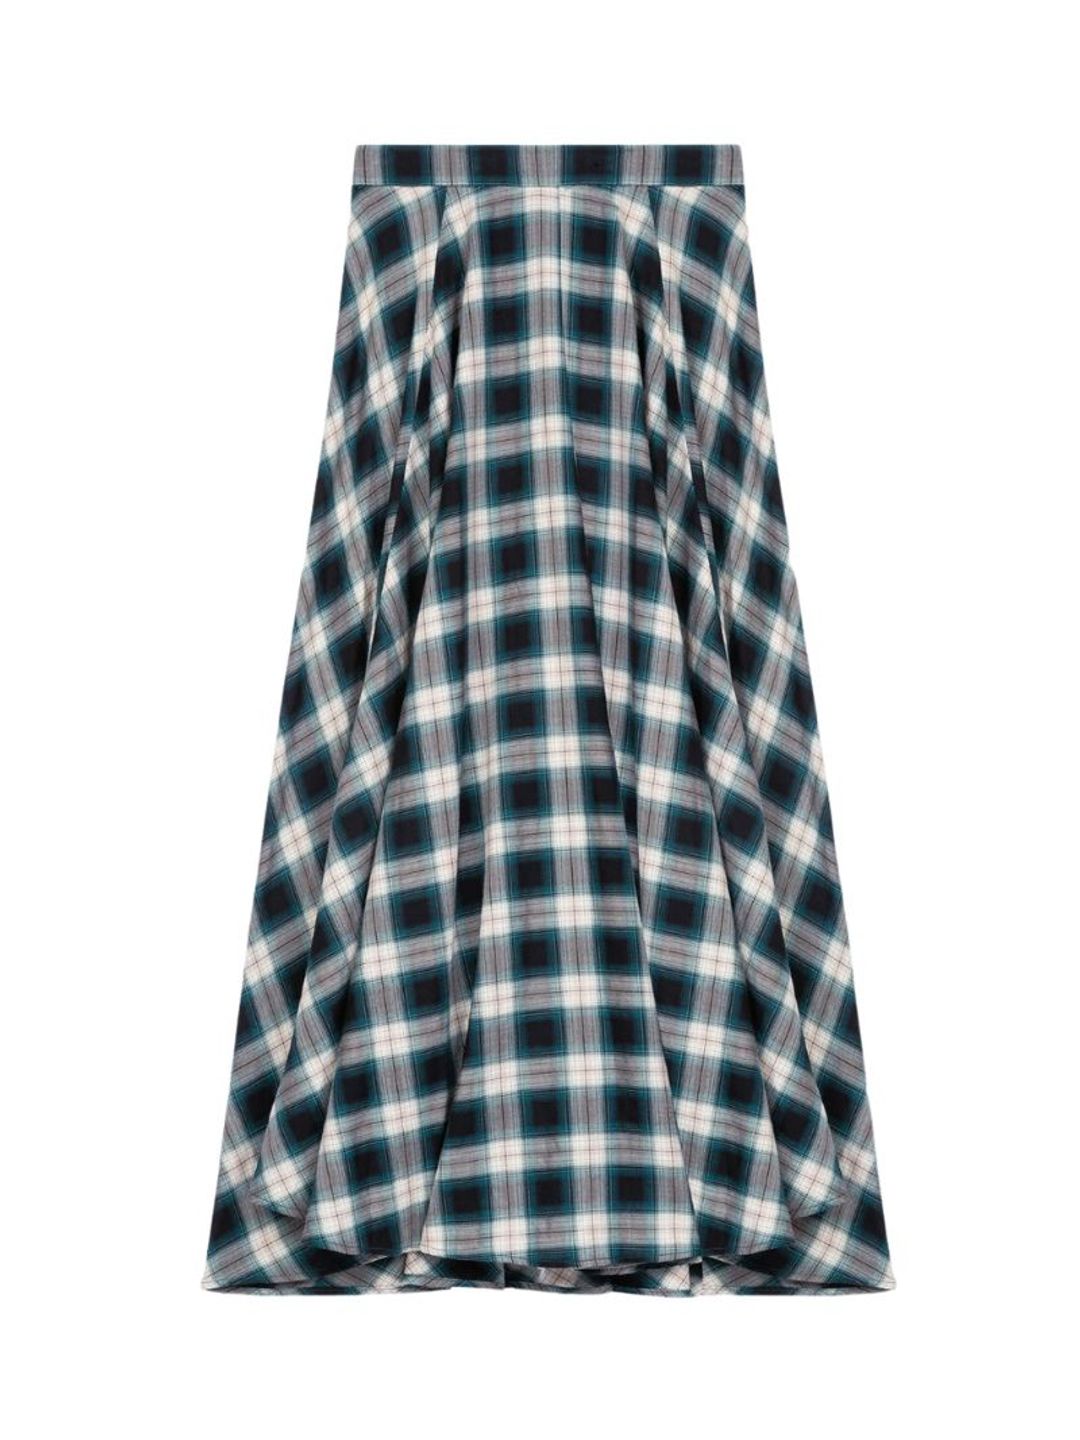 Green and white checked skirt - Maje 